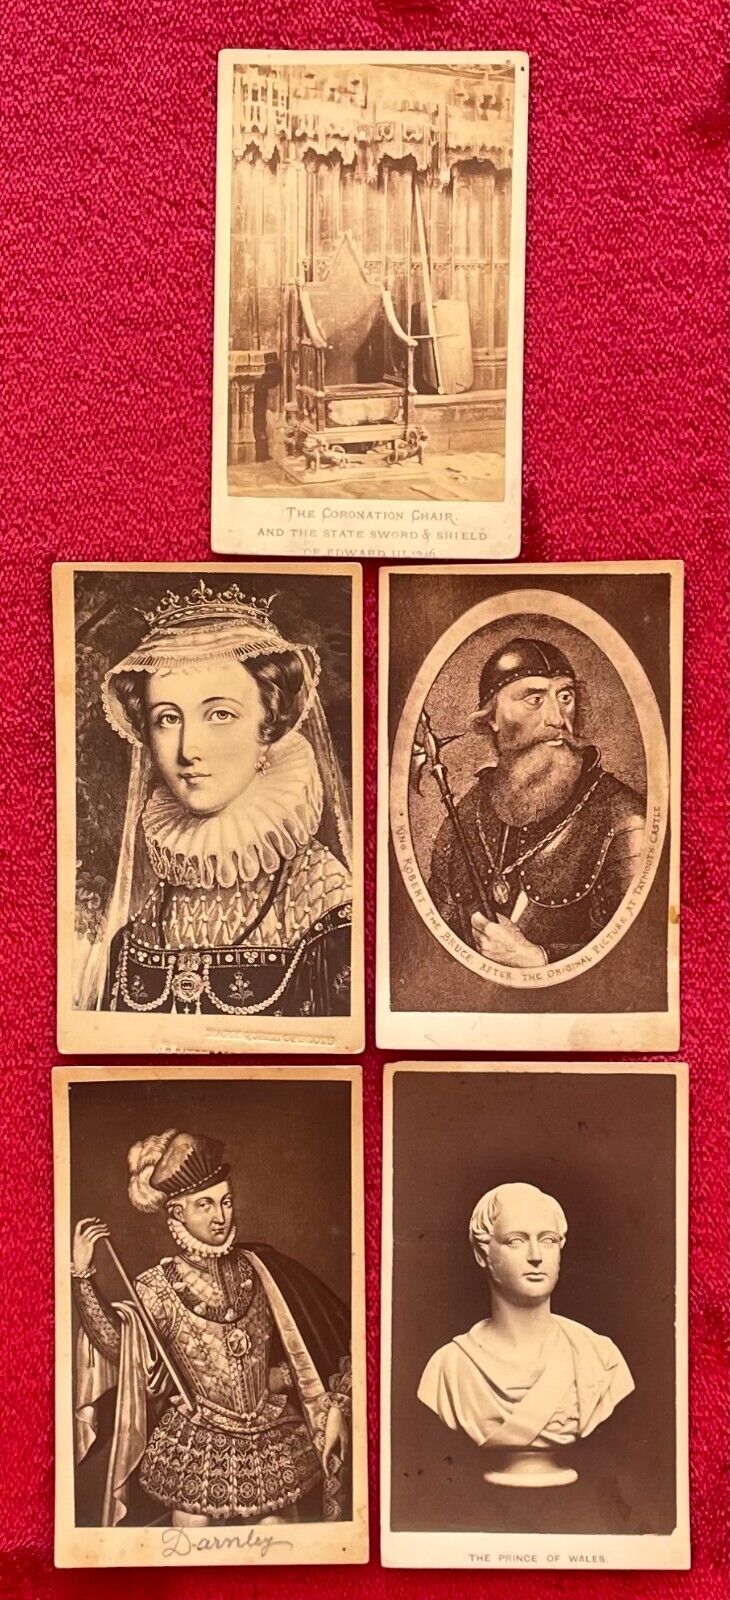 MEDIEVAL BRITISH ROYALTY CDV PHOTOS - MARY QUEEN OF SCOTS, ROBERT THE BRUCE, ETC